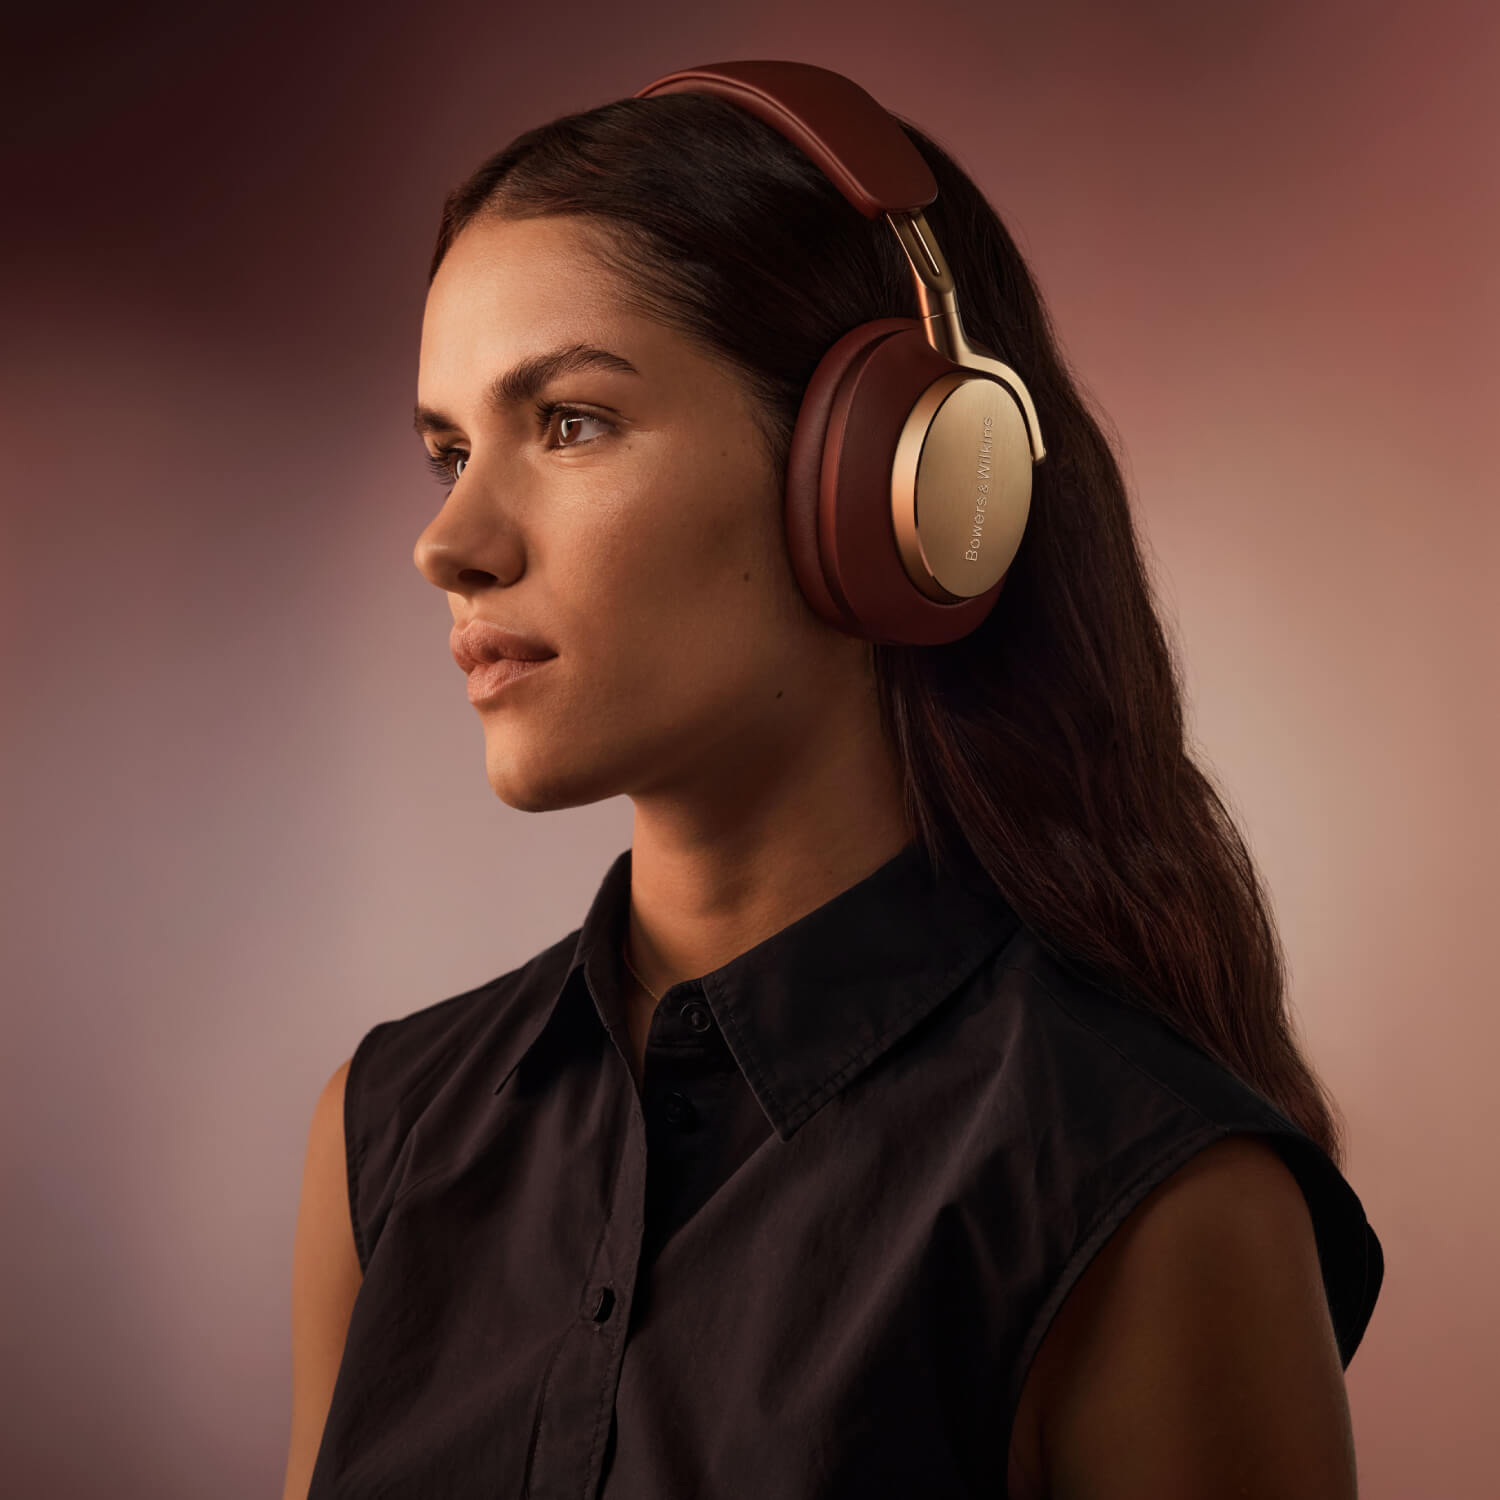 https://www.bowerswilkins.com/on/demandware.static/-/Sites-master-catalog-soundunited/default/dw394df156/bowers/Rich-Content/bw_px8_herobanner_mobile.jpg